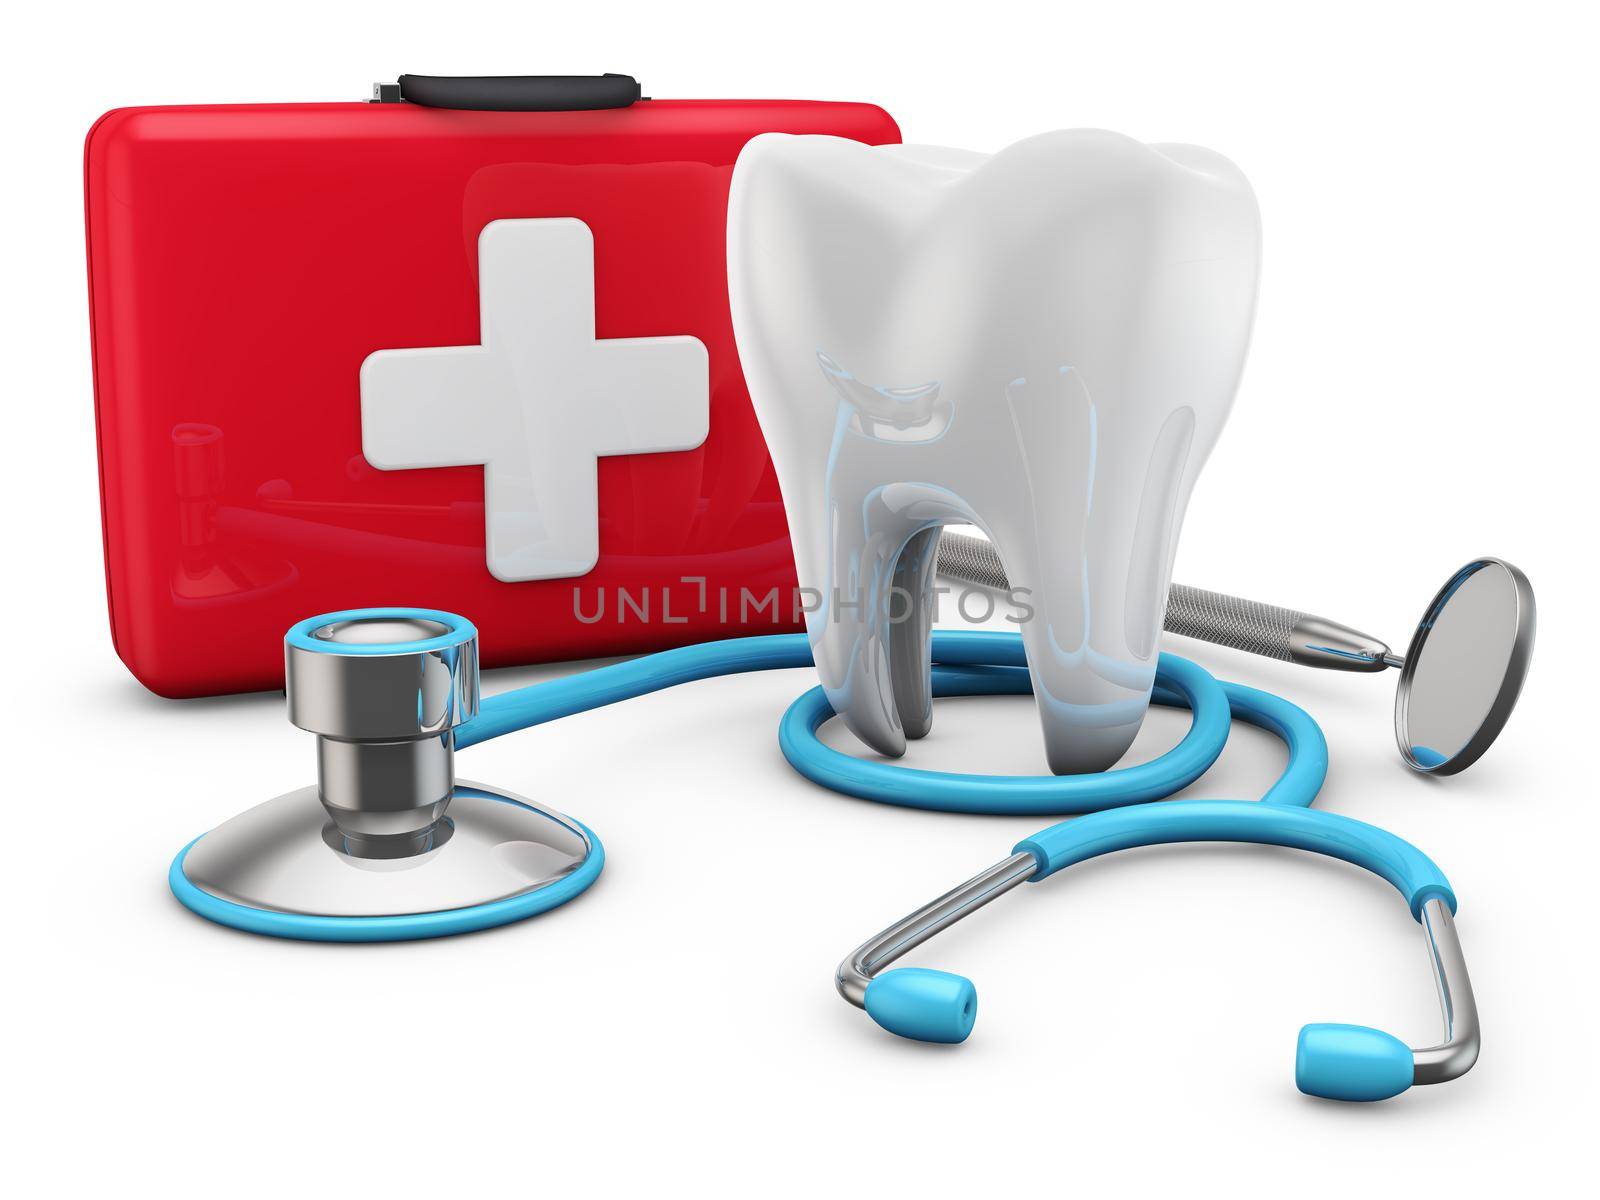 stethoscope on red suitcase and a tooth, 3d render